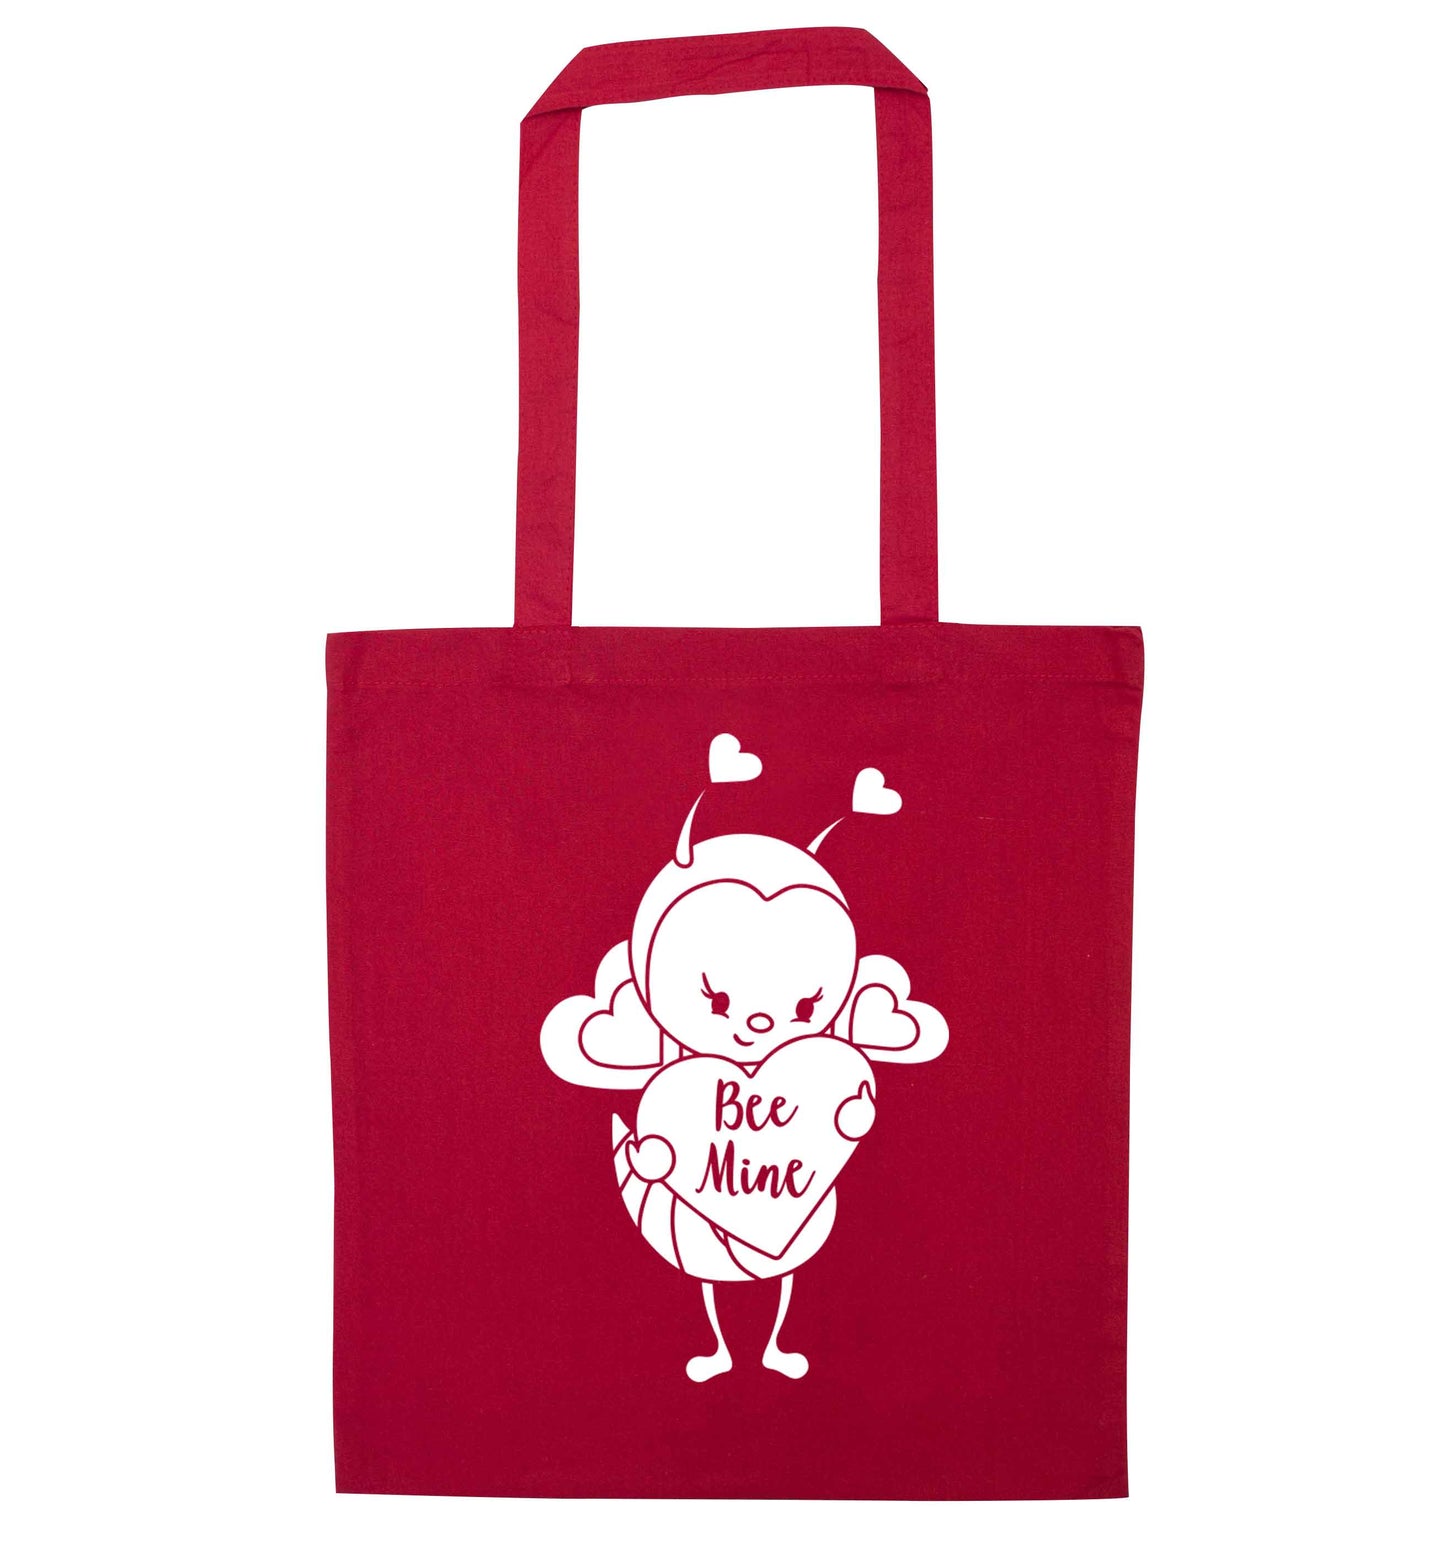 Bee mine red tote bag